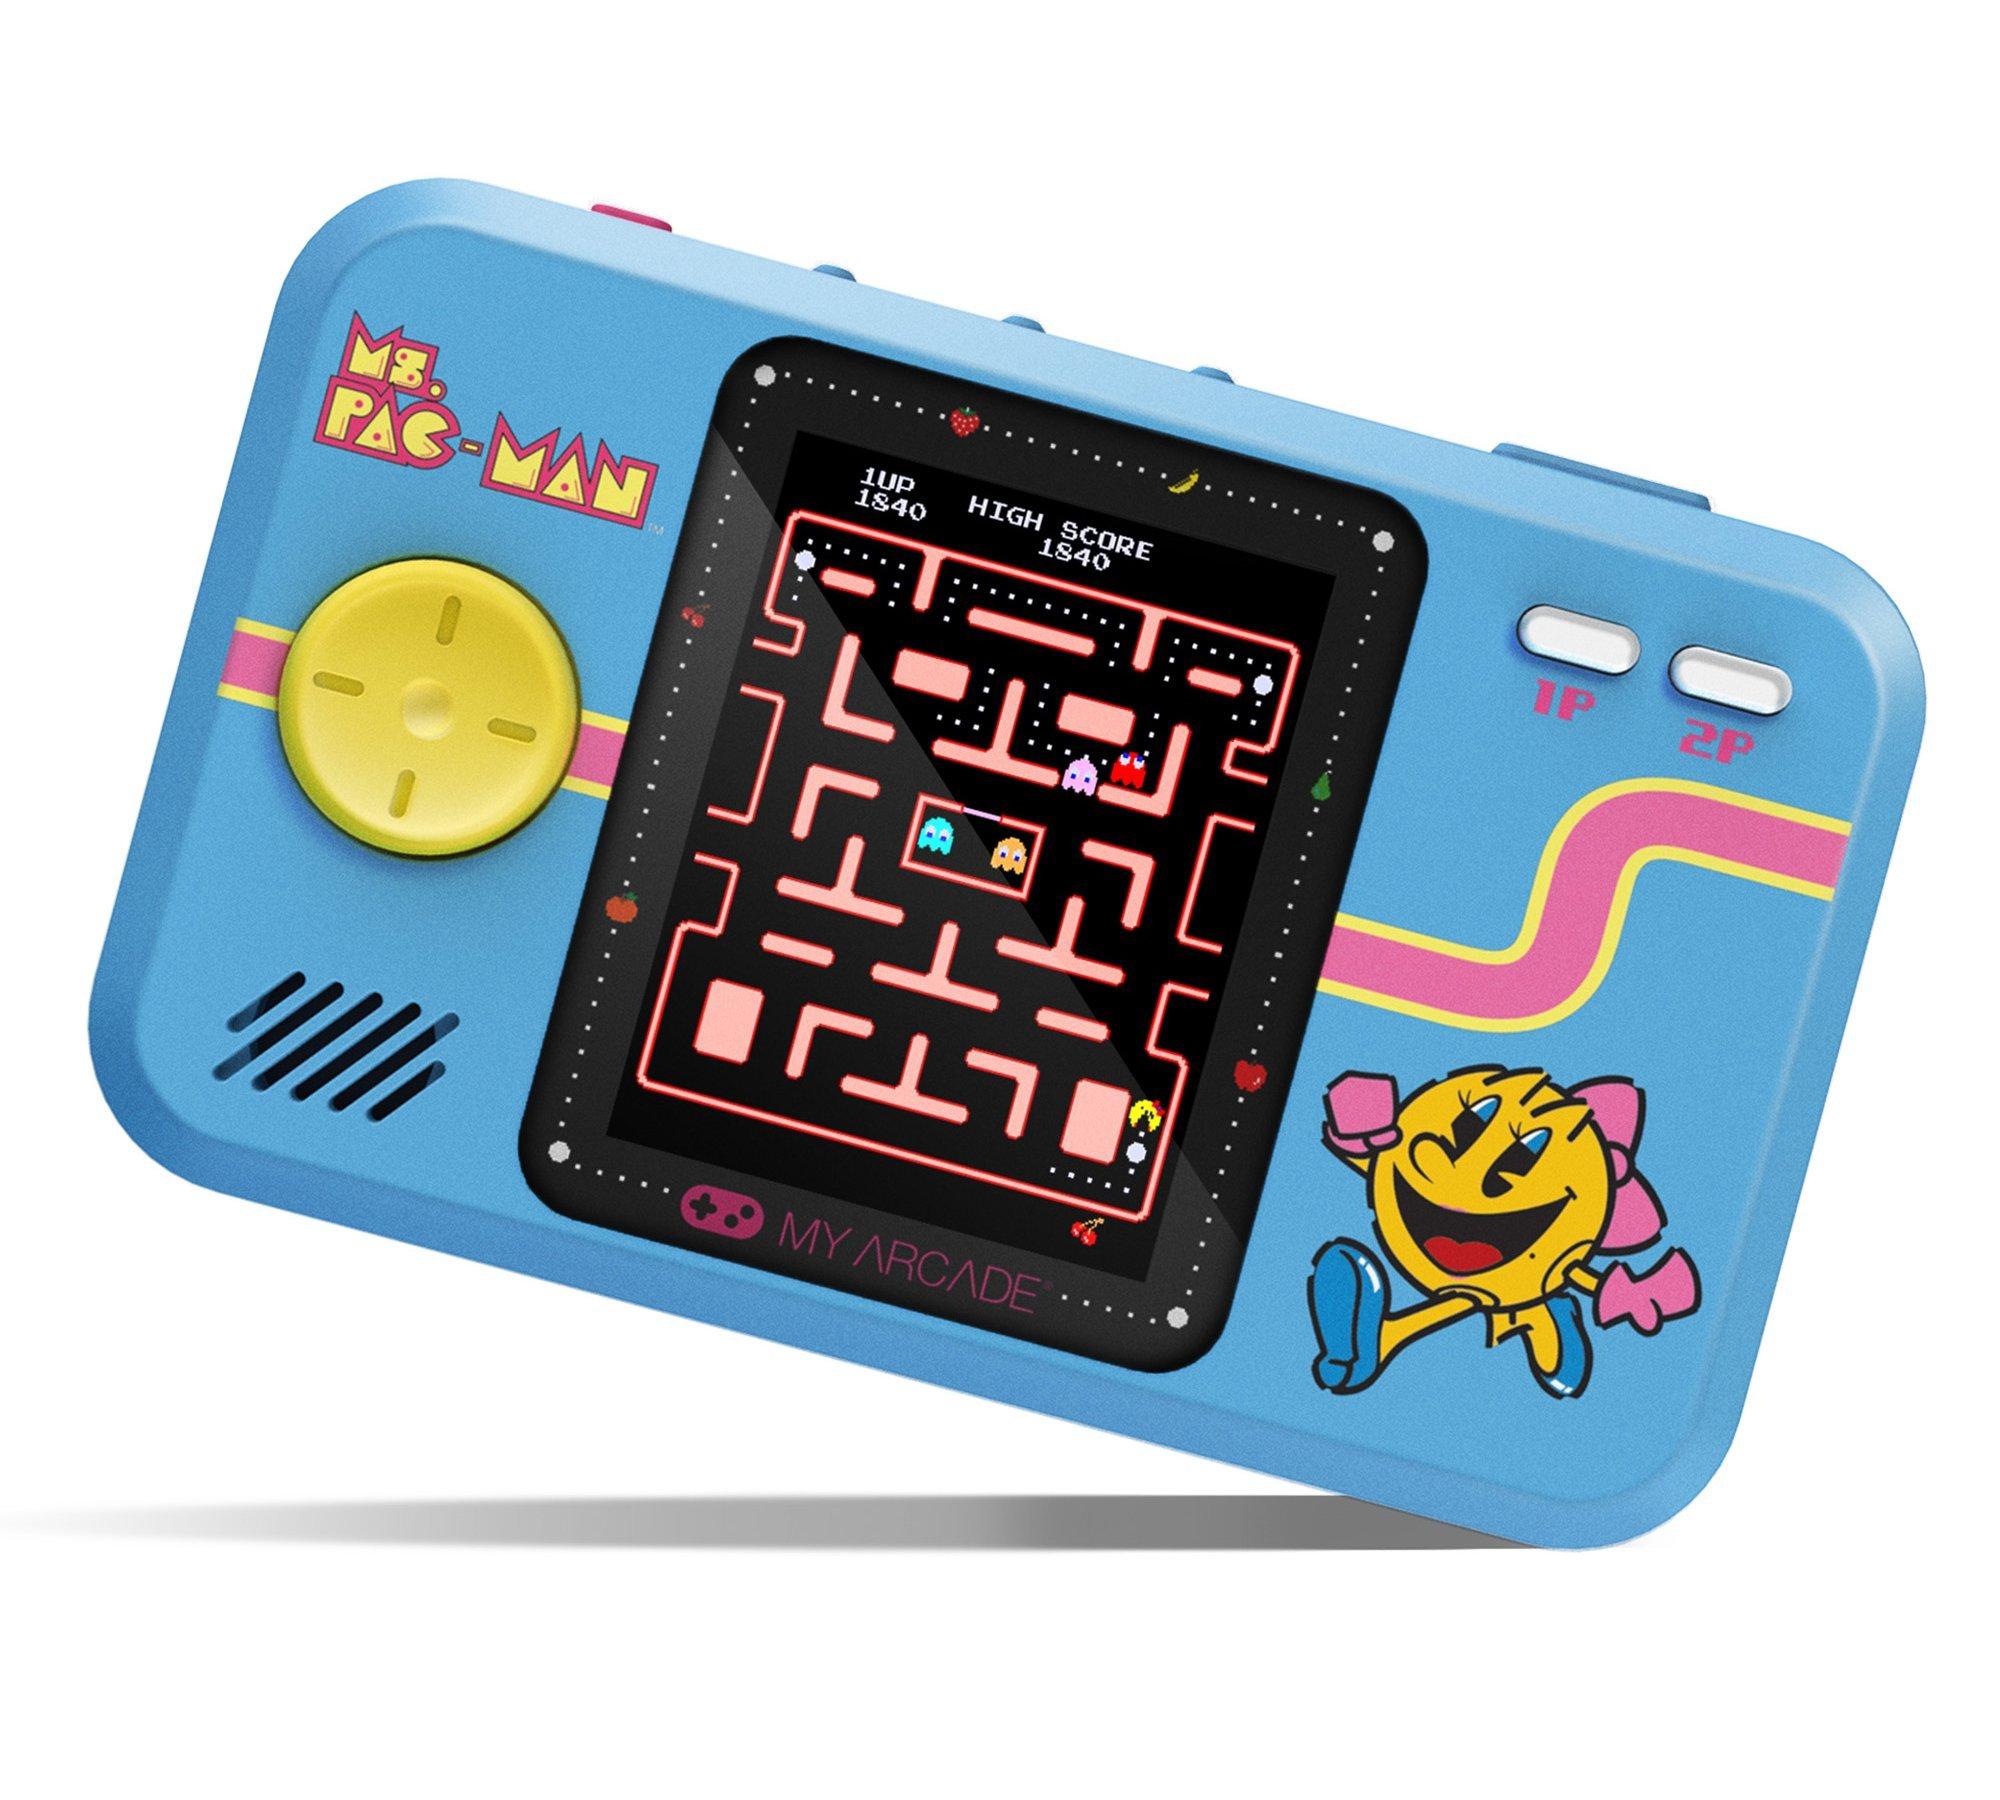 My Arcade MS.PAC-MAN Pocket Player PRO Handheld Portable Video Game System